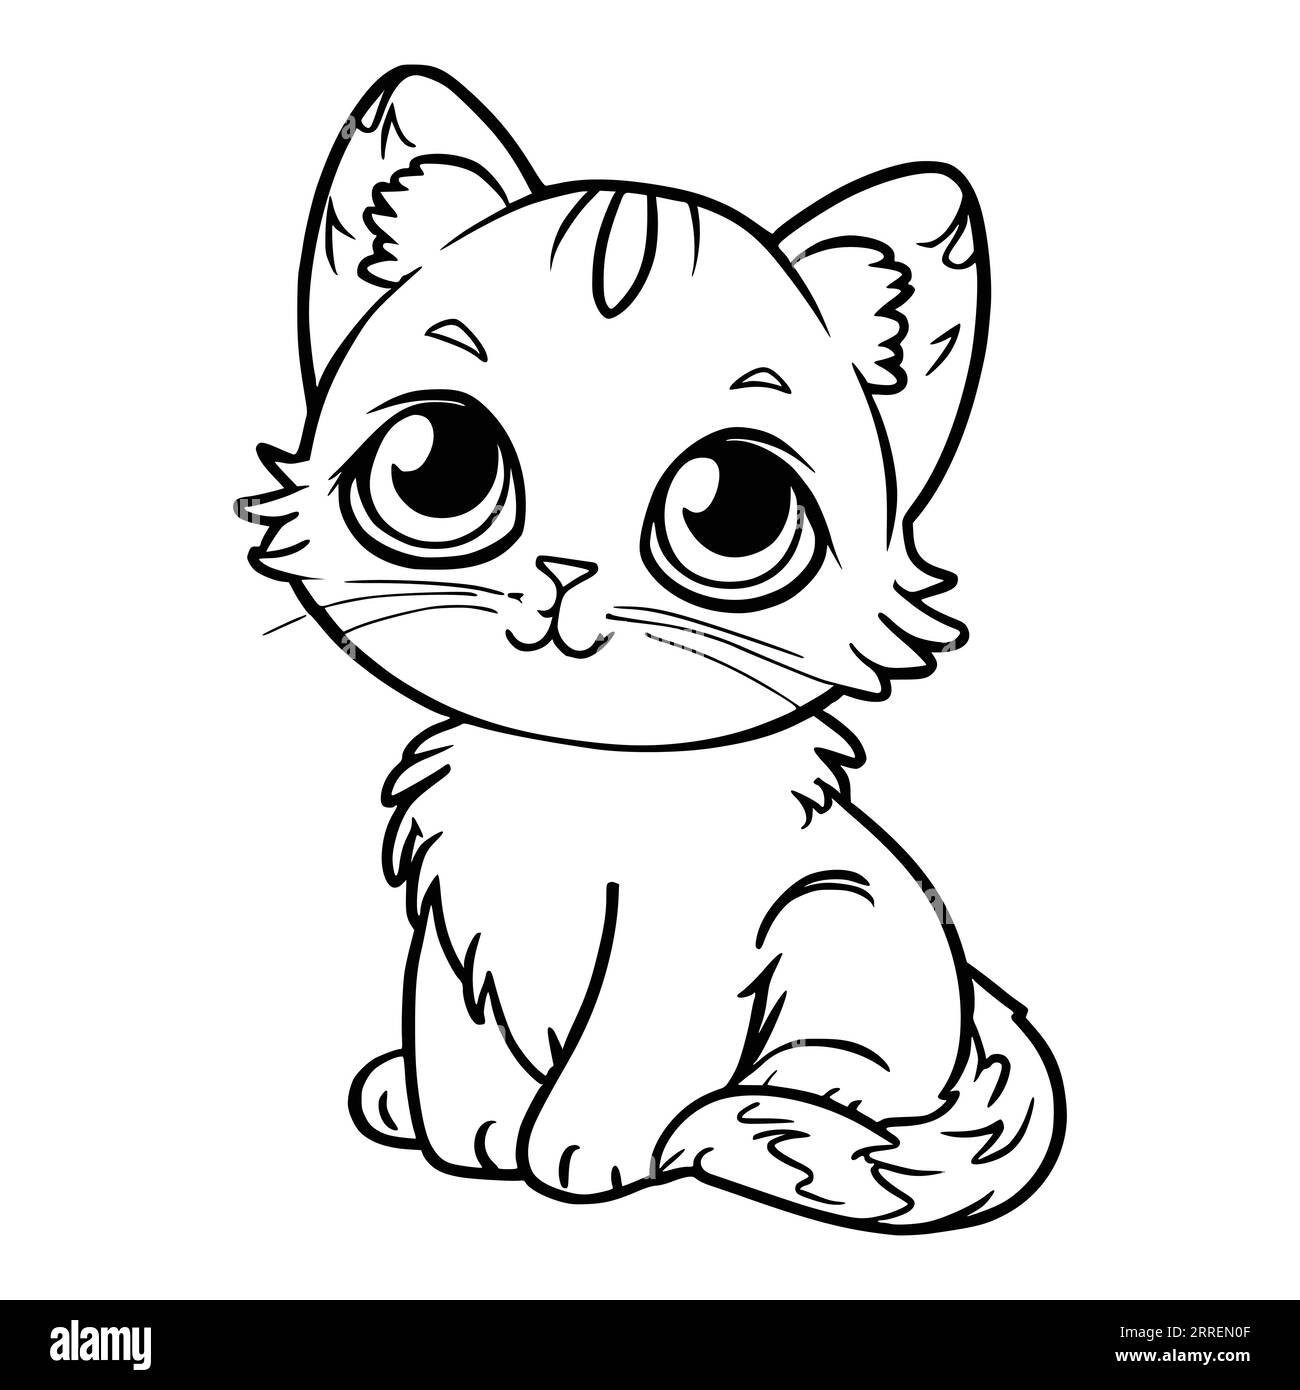 Cute Kitten Coloring Pages for Kids and Toddlers Stock Vector Image ...